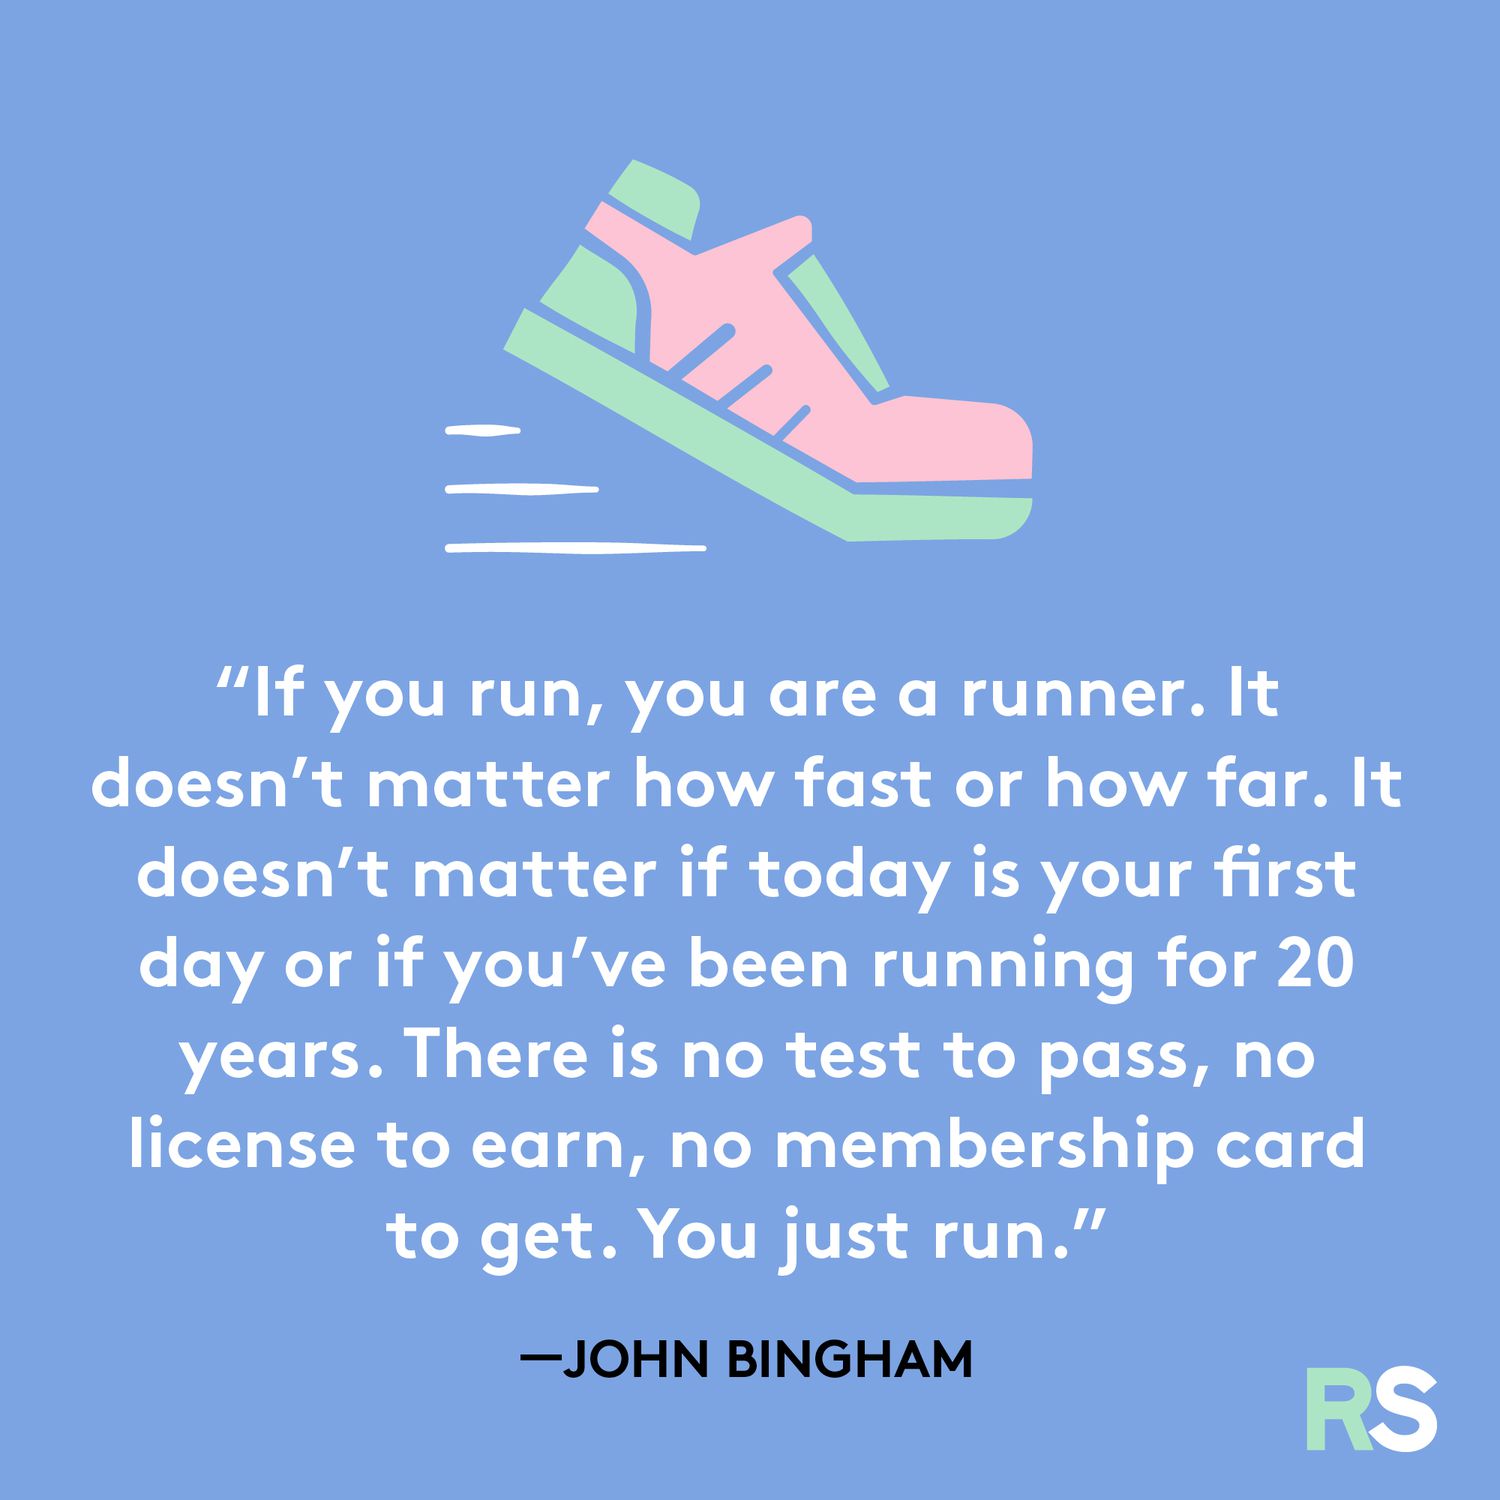 If you run, you are a runner quote